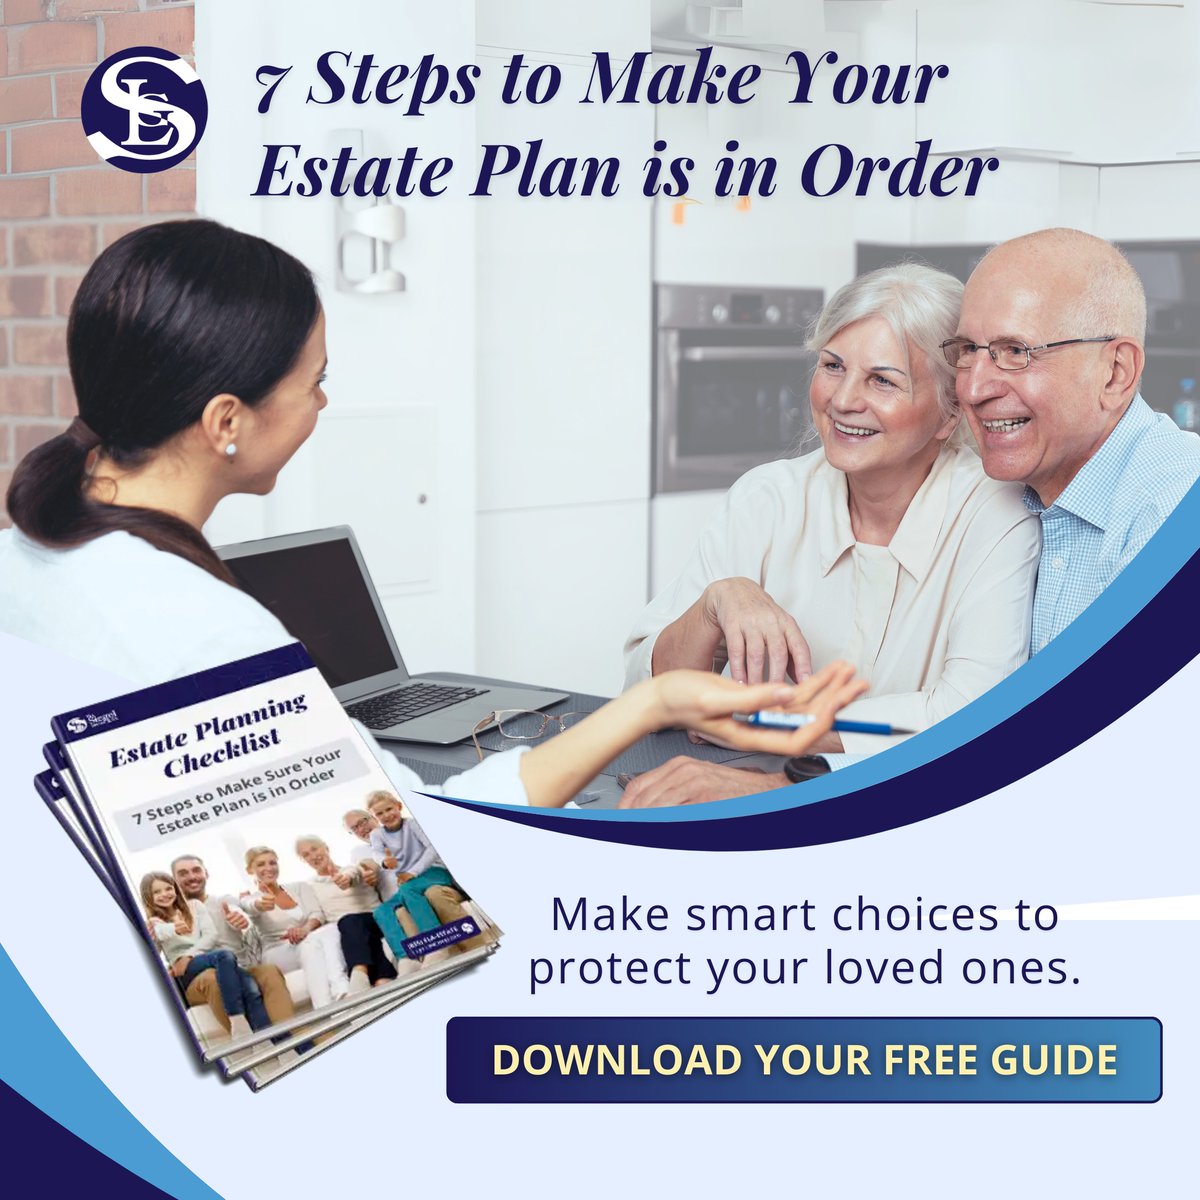 Do you want to safeguard your loved ones' future?

Make informed decisions to secure your family today. Protect your family smarter by downloading our FREE guide from our website! 
.
.
.

#EstatePlanning #FloridaEstatePlanning #TheSiegelLawGroup